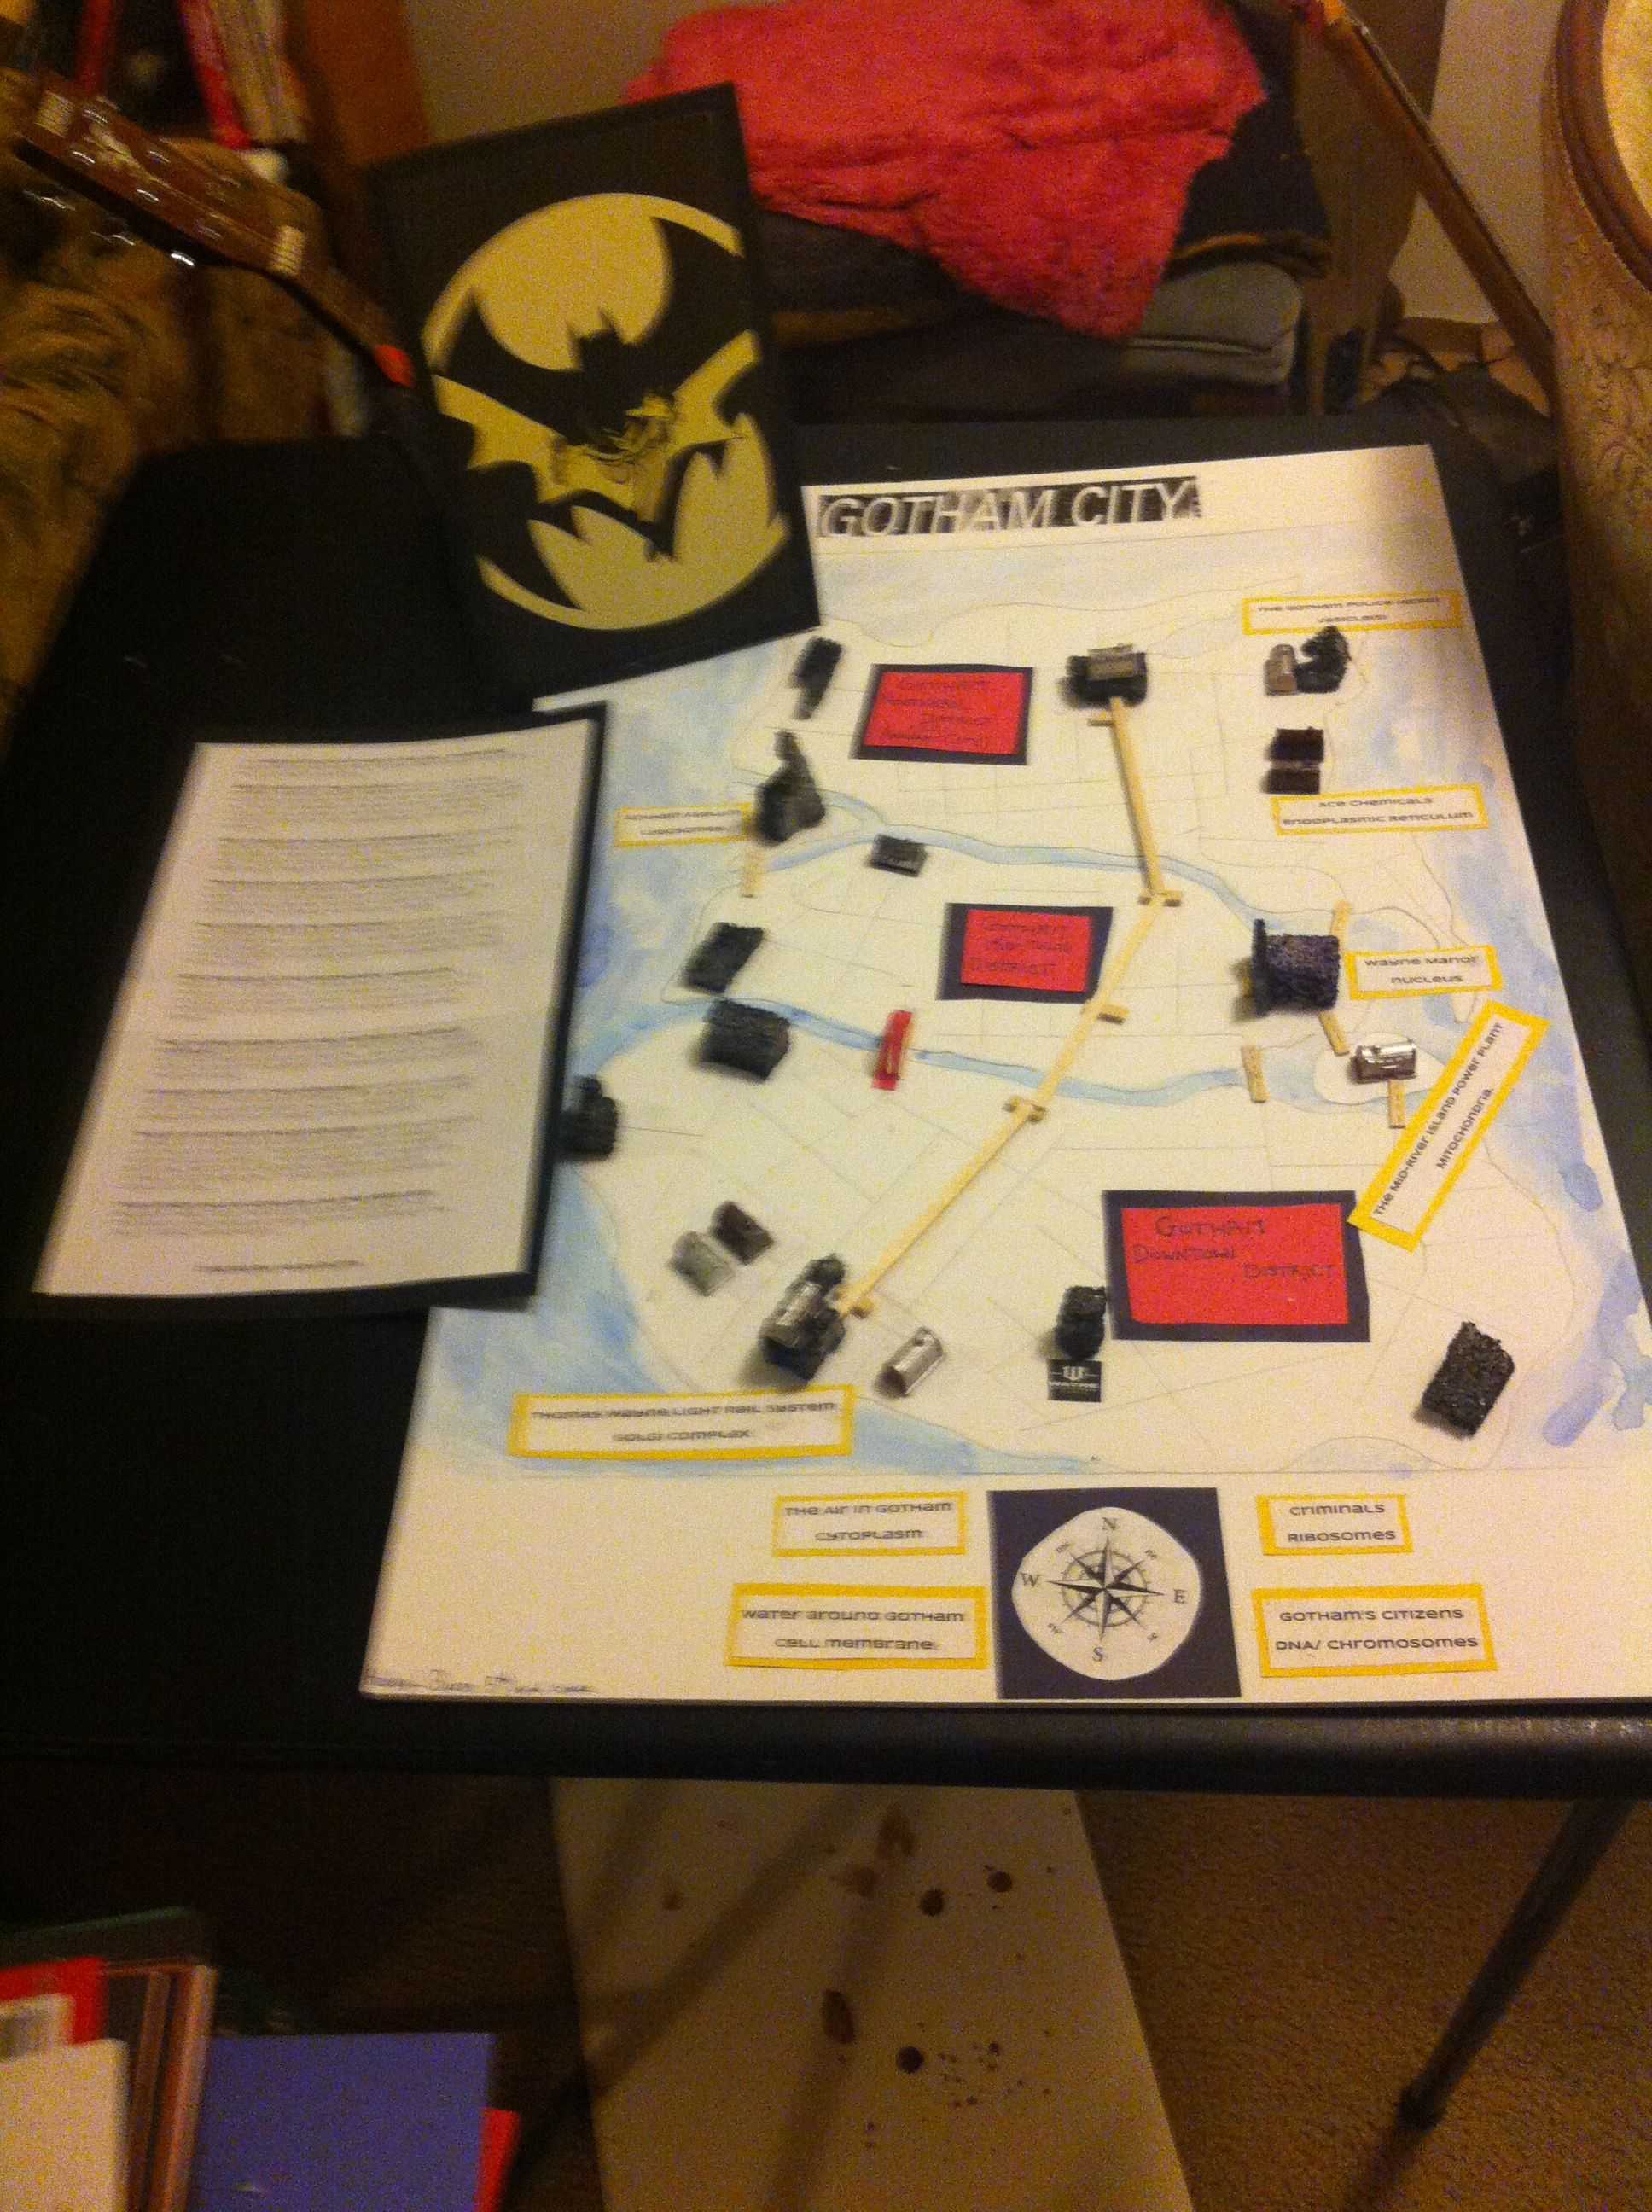 Transport In Cells Worksheet Answers and Gotham City as Cell Analogy Project It Got An A